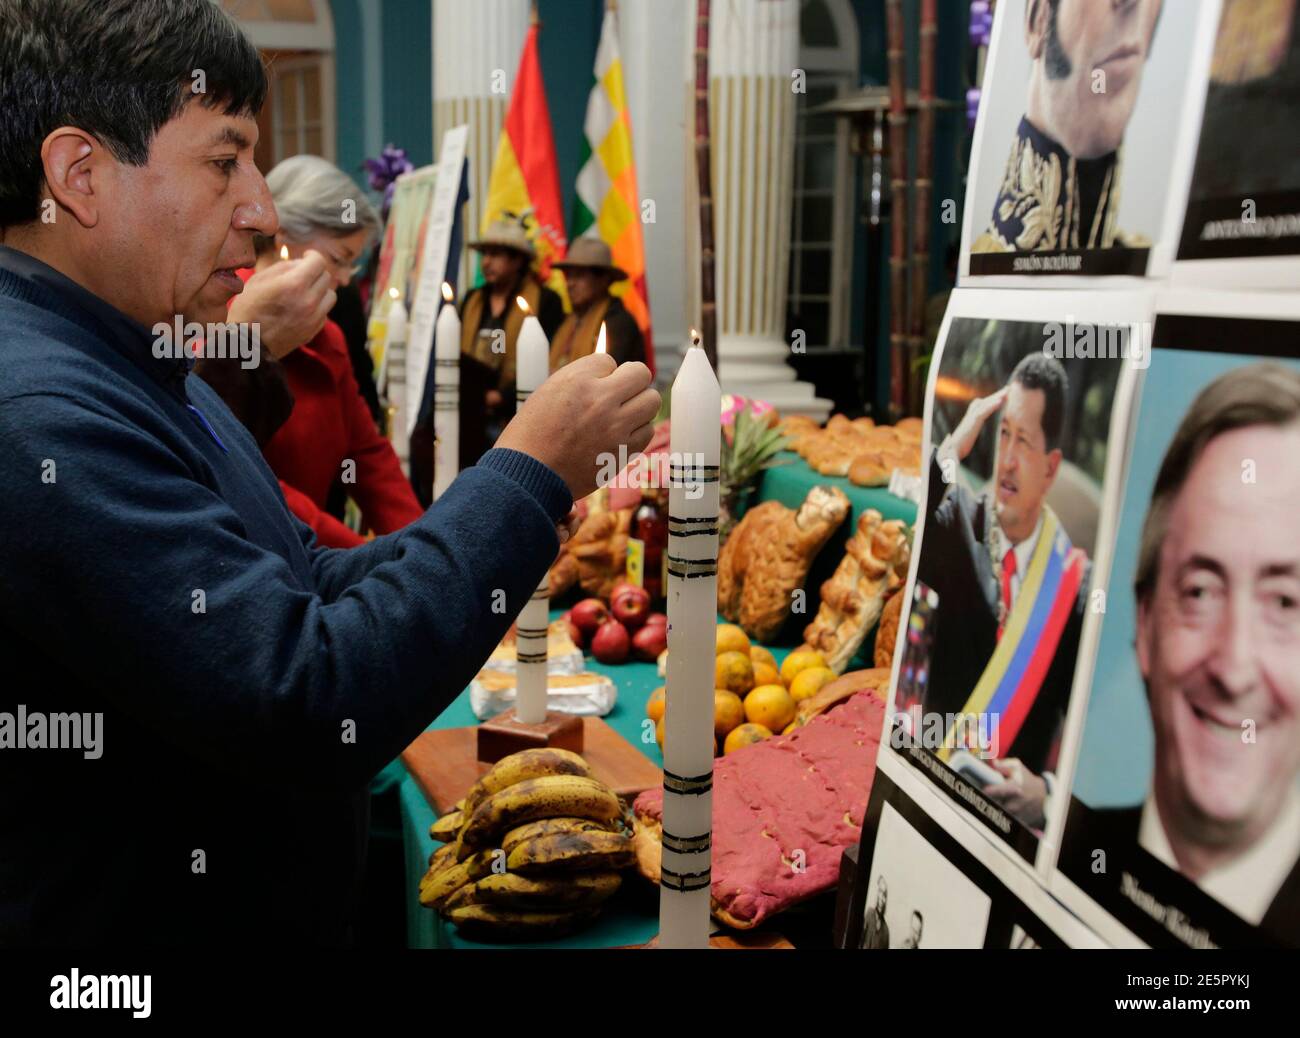 Bolivian Foreign Minister David Choquehuanca lights a candle during an All Saints' Day celebration in front of images depicting Argentine former president Nestor Kirchner and Venezuela's Hugo Chavez in La Paz, November 1, 2013. Traditionally, indigenous Bolivians celebrate All Saints Day by paying homage to their dead ones with a feast of home-baked, doll-shaped breads, fresh fruit and coca leaves and flowers. The syncretism practiced by the Aymaras, a blend of Catholicism and indigenous beliefs, calls for the offerings to be neatly placed on top of graves, and then to give them away to beggar Stock Photo